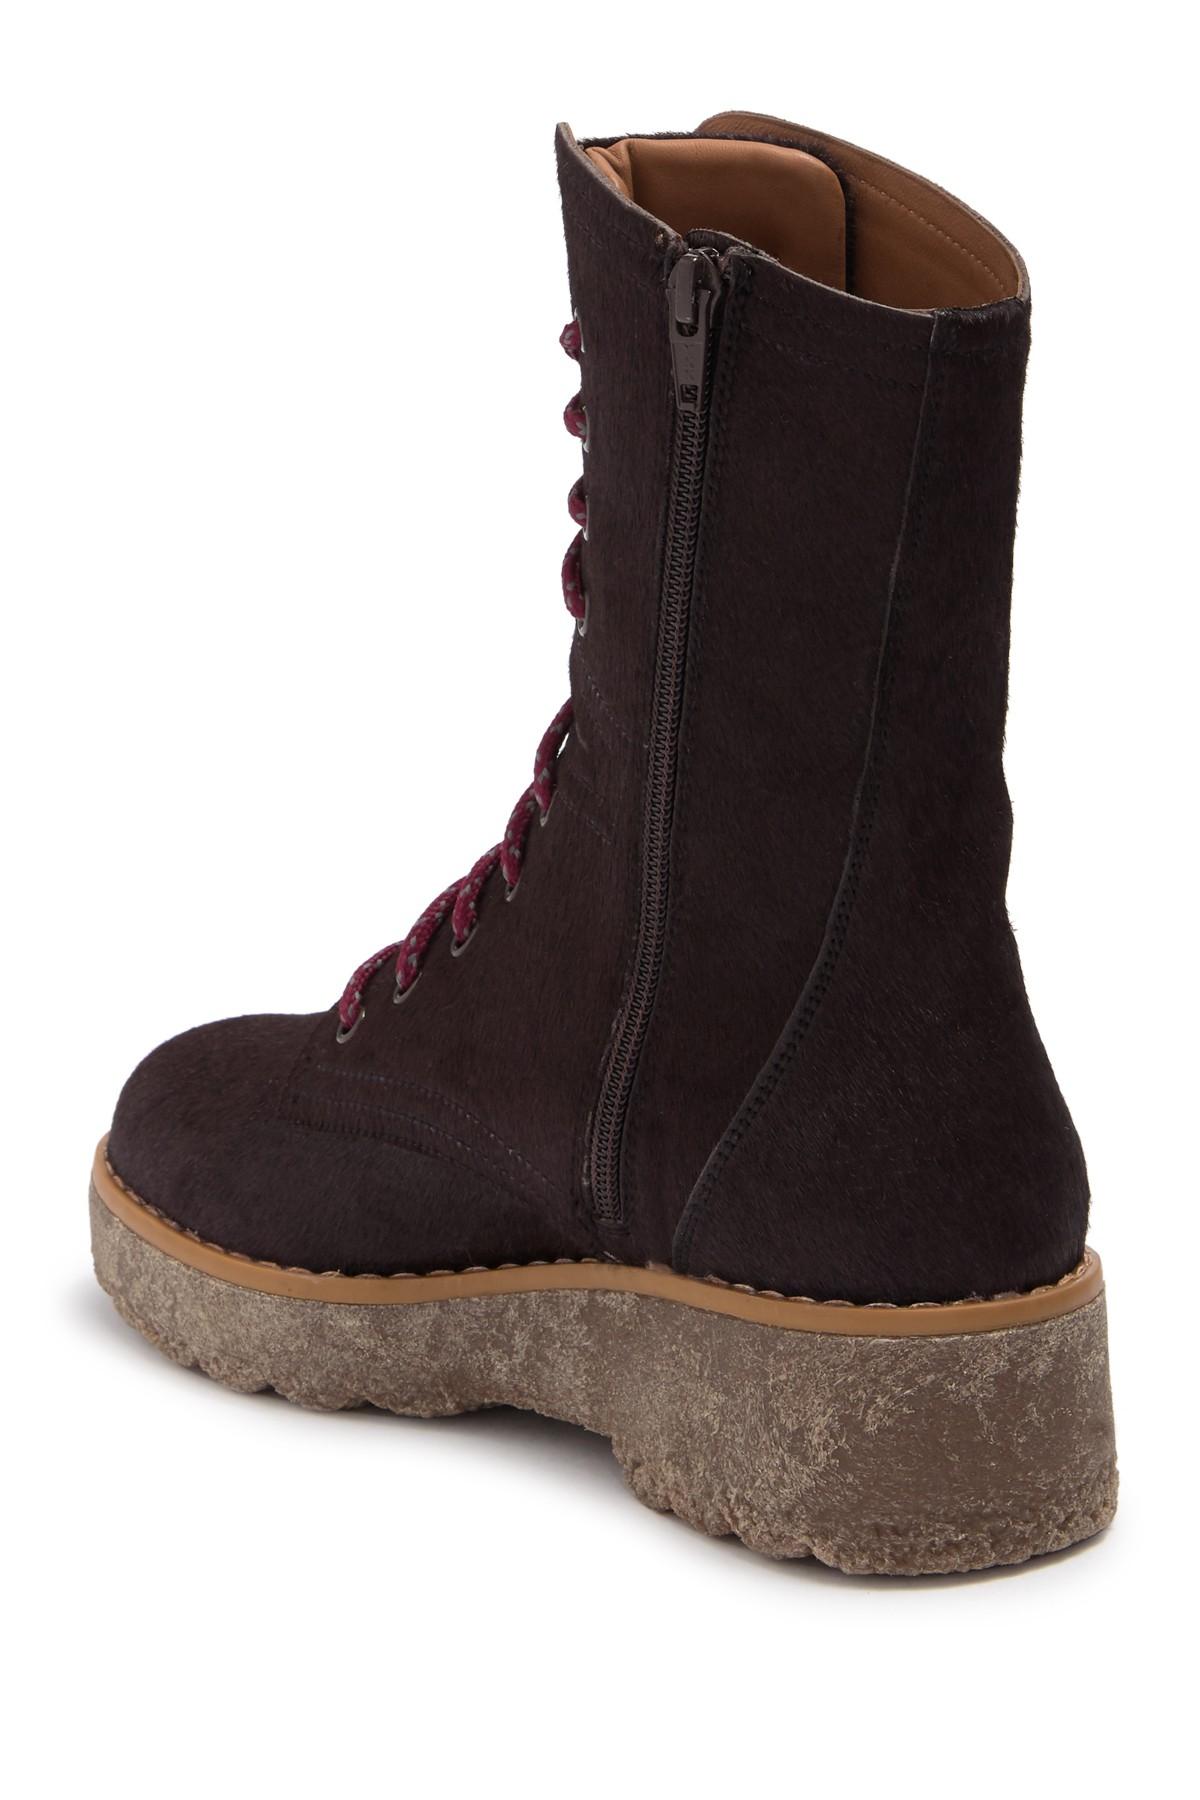 taos lace up boots